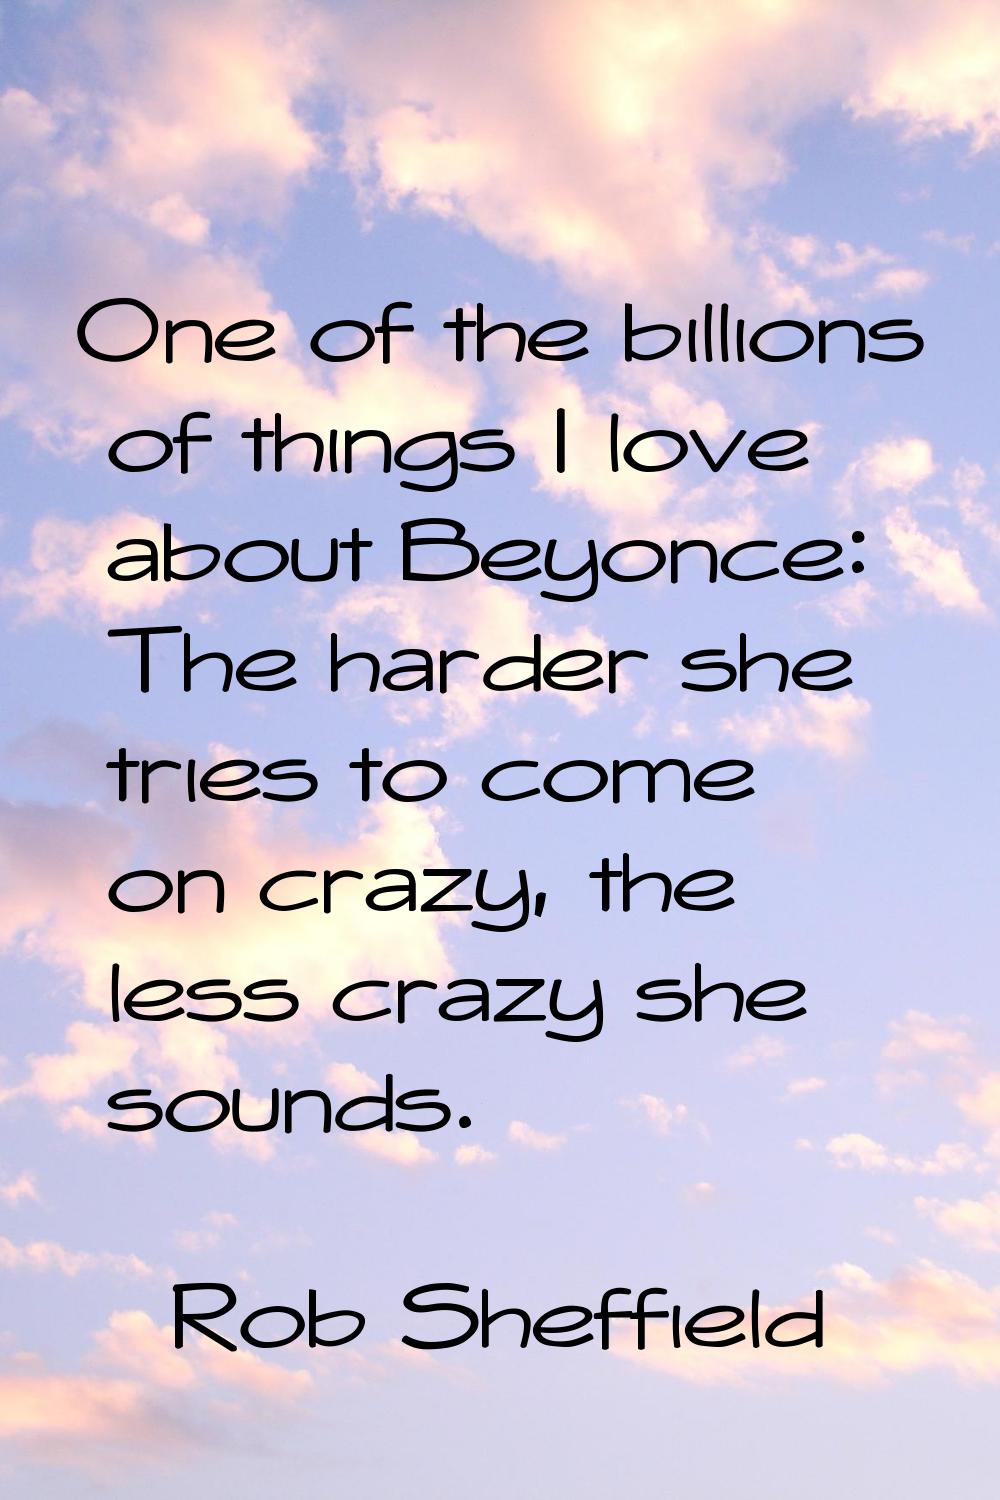 One of the billions of things I love about Beyonce: The harder she tries to come on crazy, the less